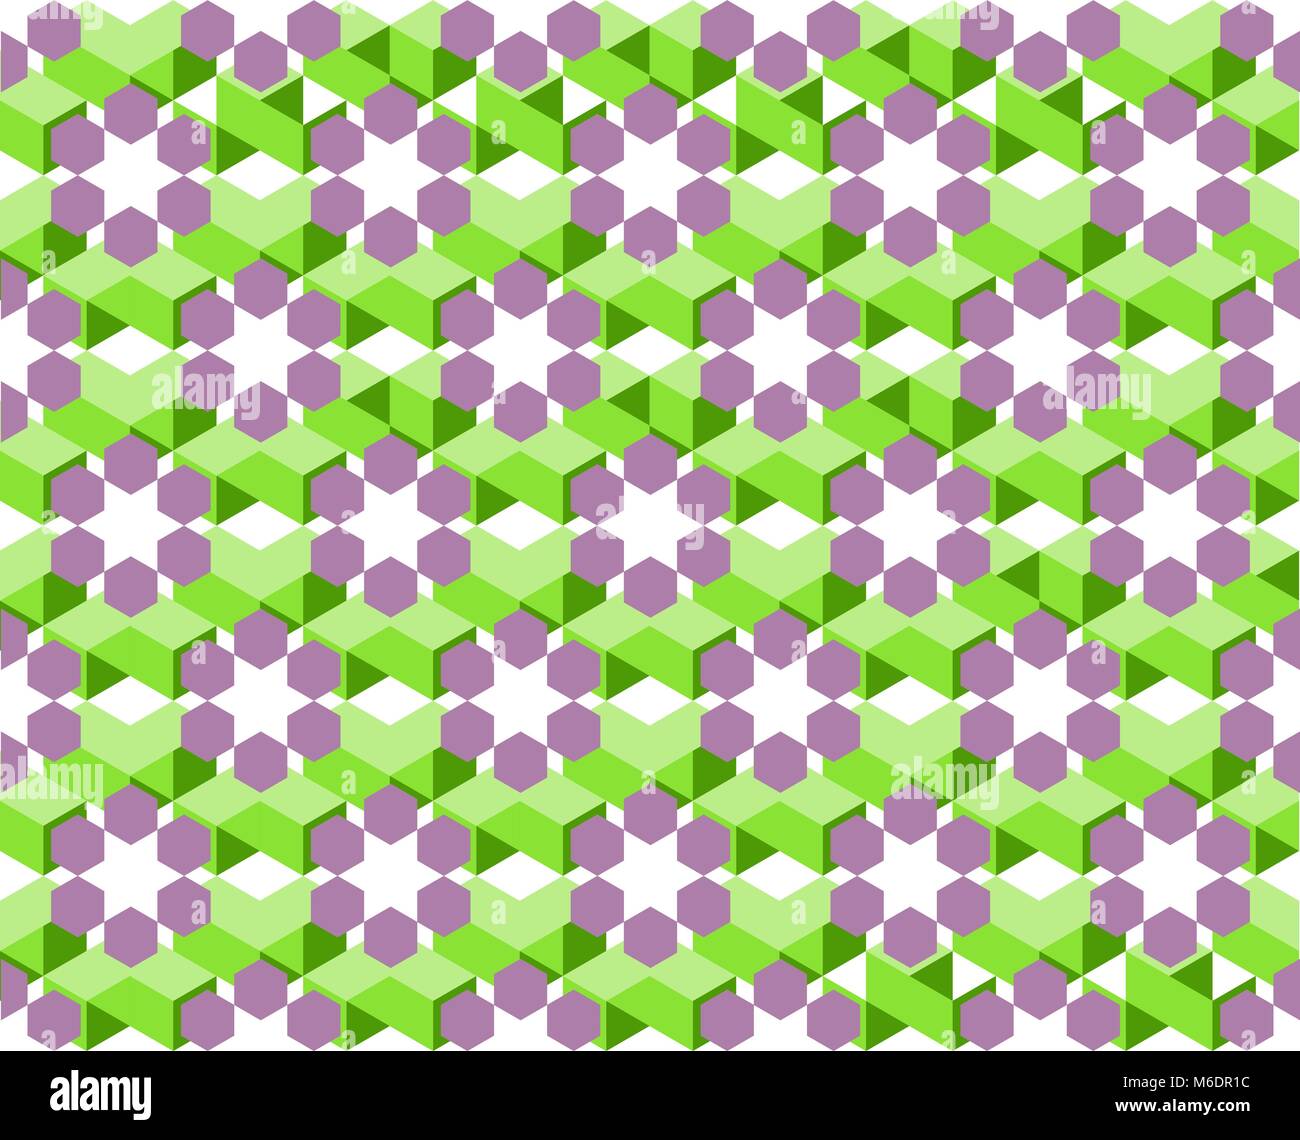 Geometric pattern of ultra violet and green color isolated on white background - Vector illustration, EPS10. Stock Vector